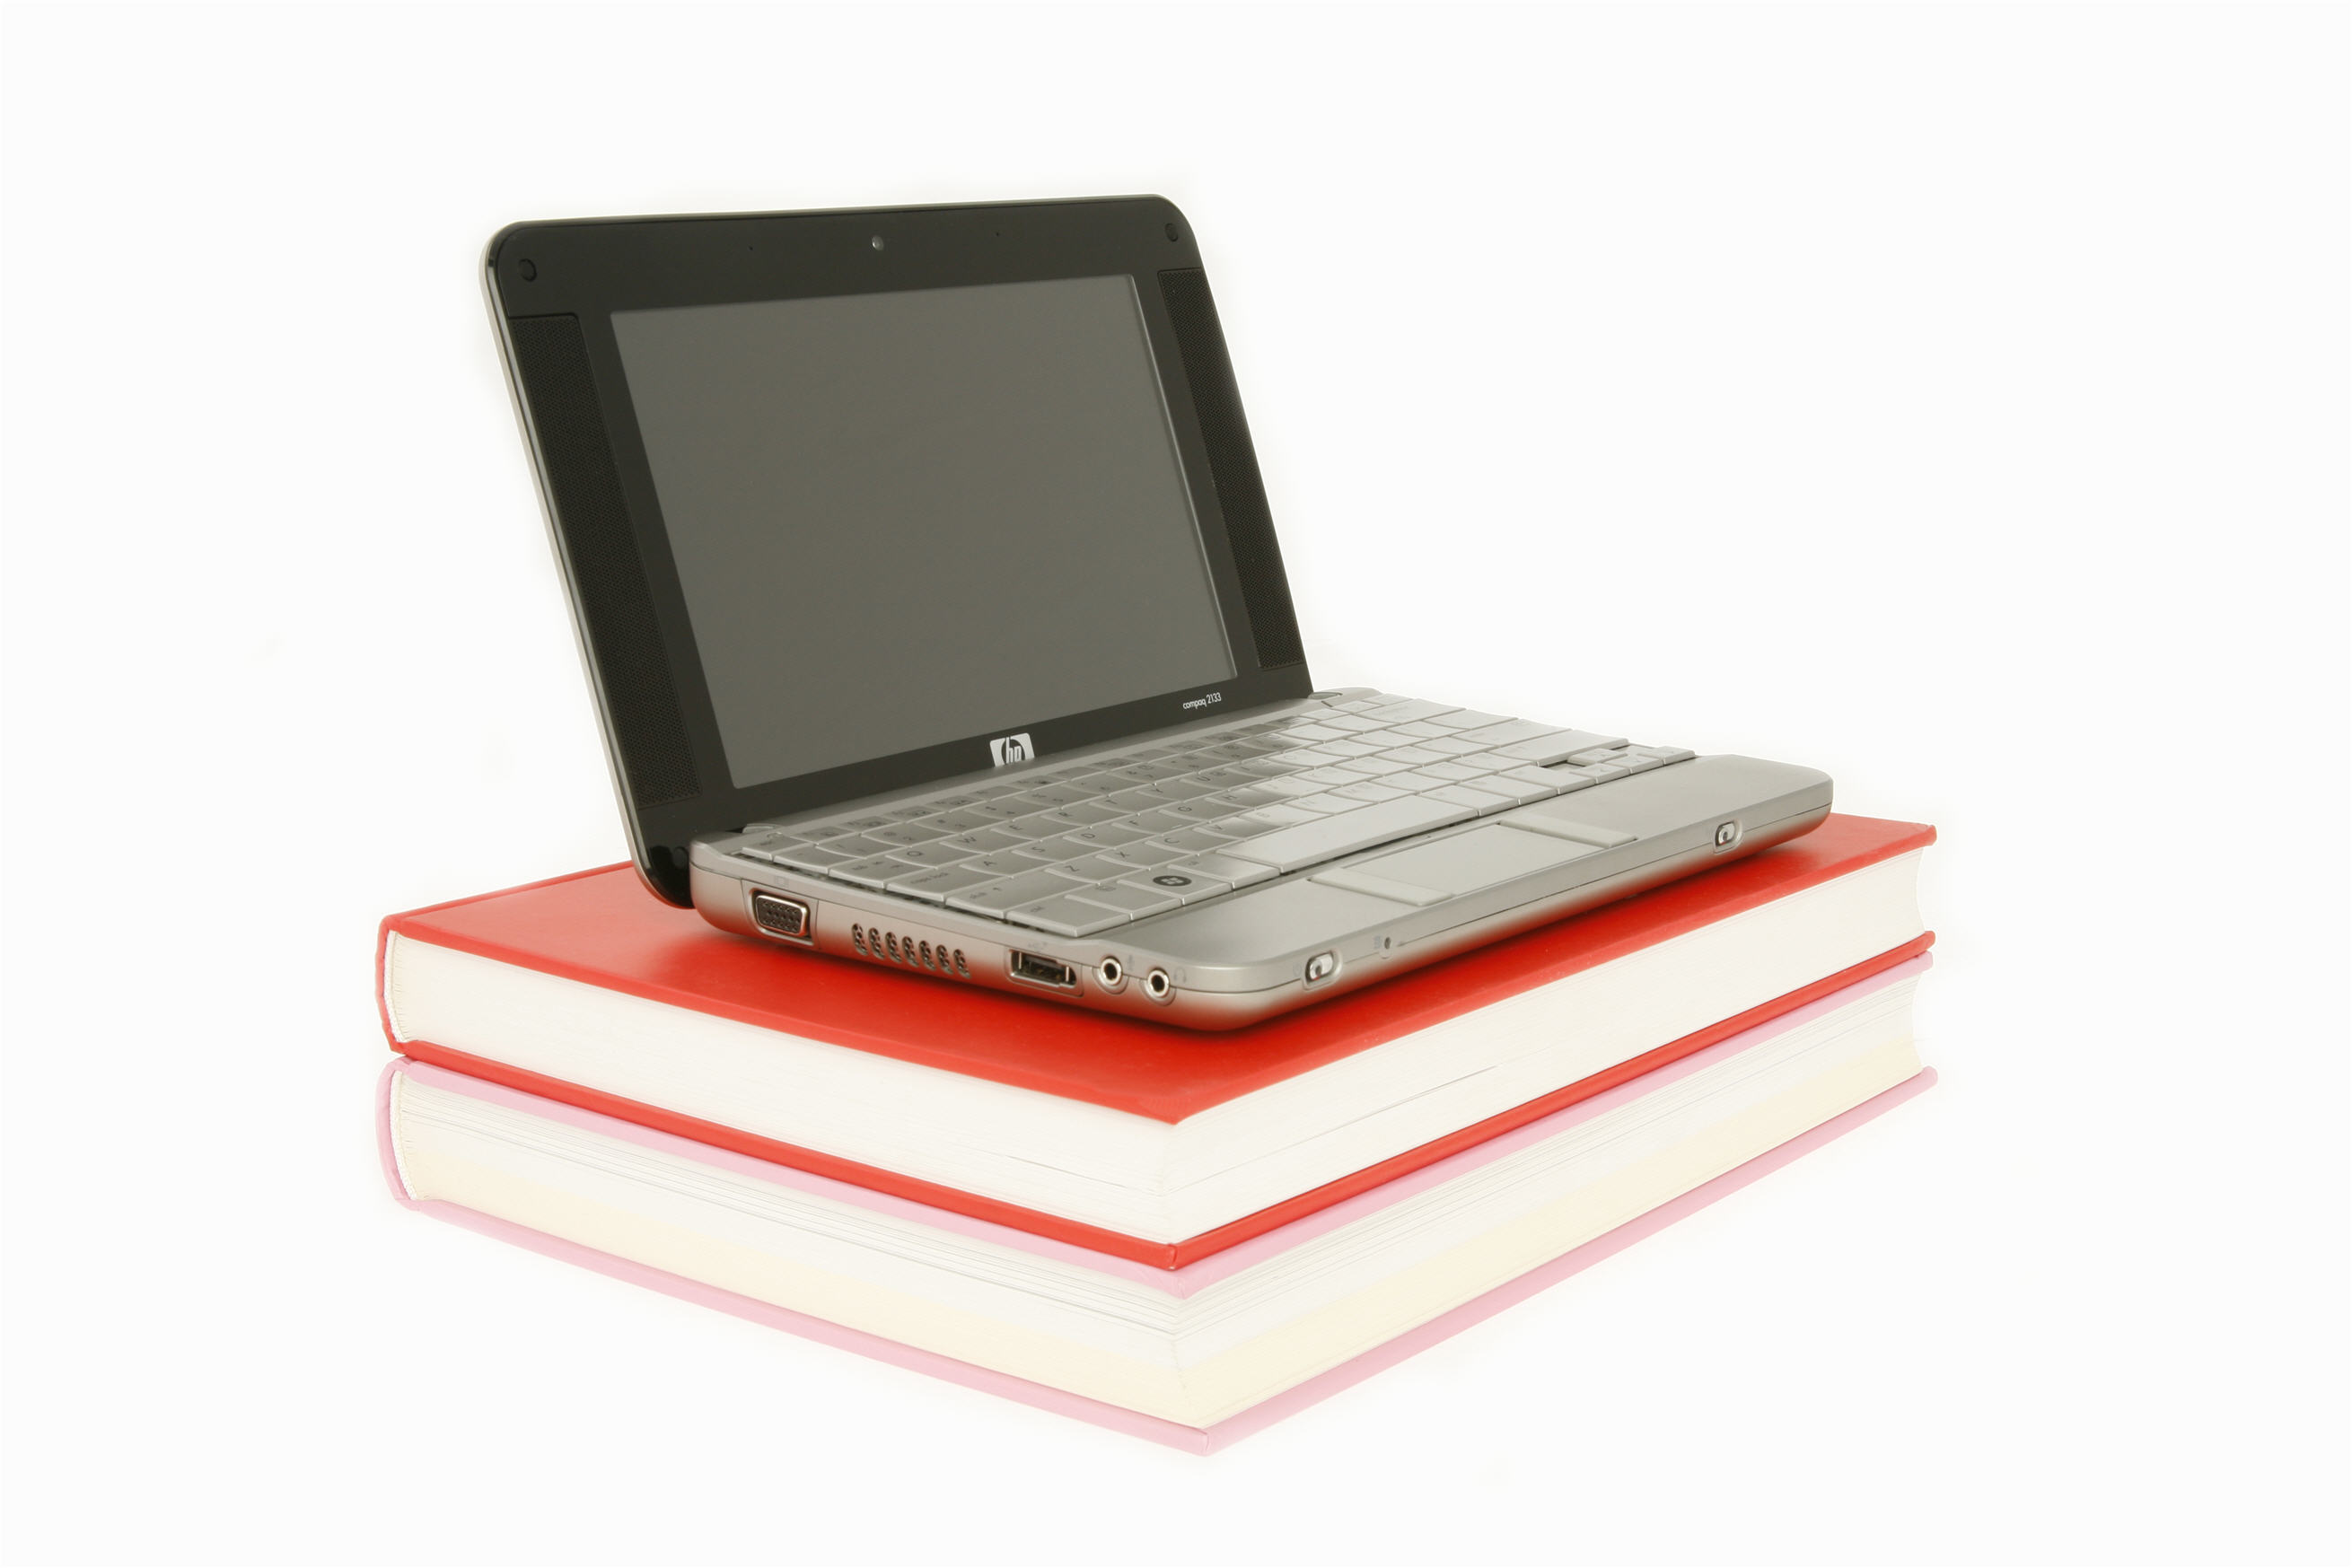 Back to school – student laptops | dell uk